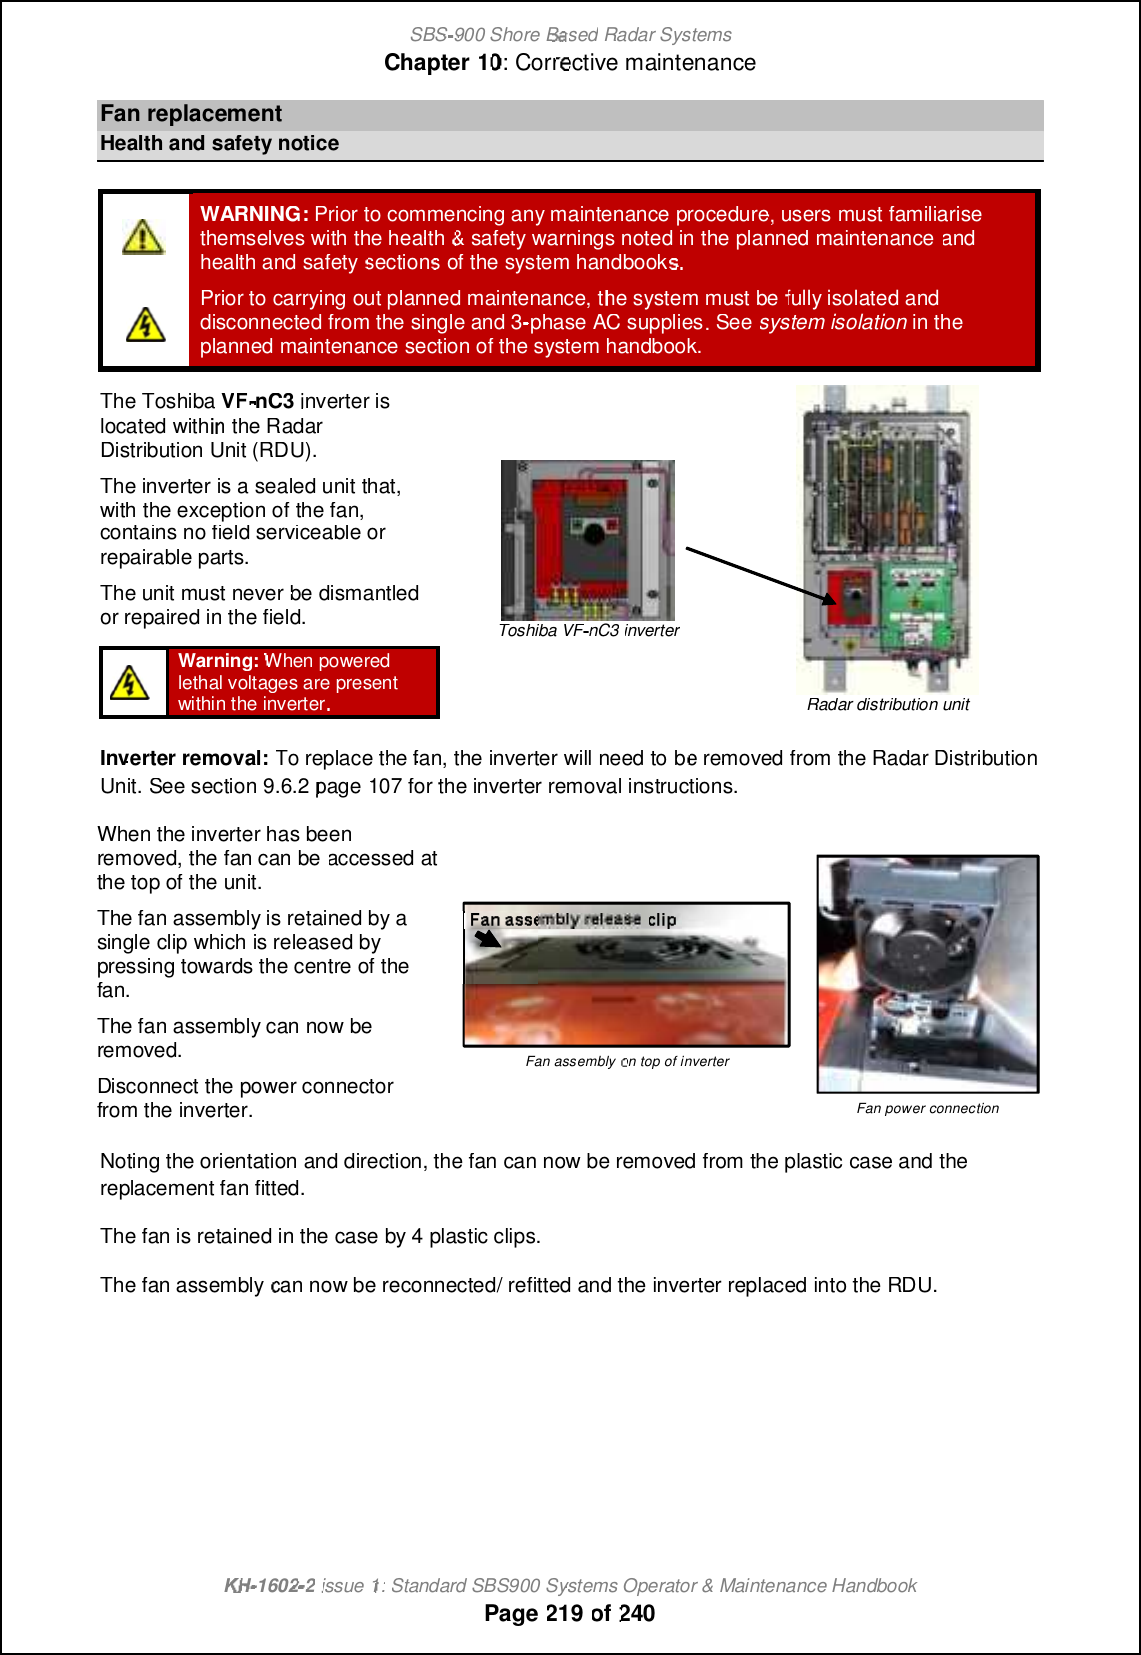 SBS-900 ShoreBaBasedRadar SystemsChapter1010:Corrective maintenanceKHKH-1602 2issue 1:Standard SBS900 Systems Operator &amp; Maintenance HandbookPage219of240FanreplacementHealth and safety noticeWARNING:Prior tocommencing any maintenanceprocedure, users must familiarisethemselves with the health&amp;safety warnings noted in the planned maintenanceandhealth and safetysectionsof the system handbook.Prior to carrying out planned maintenance, the system mustbefully isolated anddisconnectedfrom the single and 3-phase AC supplies. Seesystem isolationin theplanned maintenance section of the system handbook.The ToshibaVFVF-nC3inverter islocated within the RadarDistribution Unit (RDU).The inverter isa sealed unit that,with the exception of the fan,contains no field serviceable orrepairable parts.The unit must never be dismantledor repaired in the field.Toshiba VFnC3inverterRadar distribution unitWarning:When poweredlethal voltages are presentwithin the inverter.Inverter removal:To replace the fan, the inverter will need tobe removed from the Radar DistributionUnit.See section9.6.2page 107forthe inverter removal instructions.When the inverter has beenremoved, the fan can beaccessed atthe top of the unit.The fan assembly is retained by asingle clip which is released bypressing towards the centre of thefan.The fan assembly can now beremoved.Disconnect the power connectorfrom the inverter.Fan assemblyon top of inverterFan power connectionNoting the orientation and direction, the fan can now be removed from the plastic case and thereplacement fan fitted.The fan is retained in the case by 4 plastic clips.The fan assemblycan now be reconnected/ refitted and the inverter replaced into the RDU.